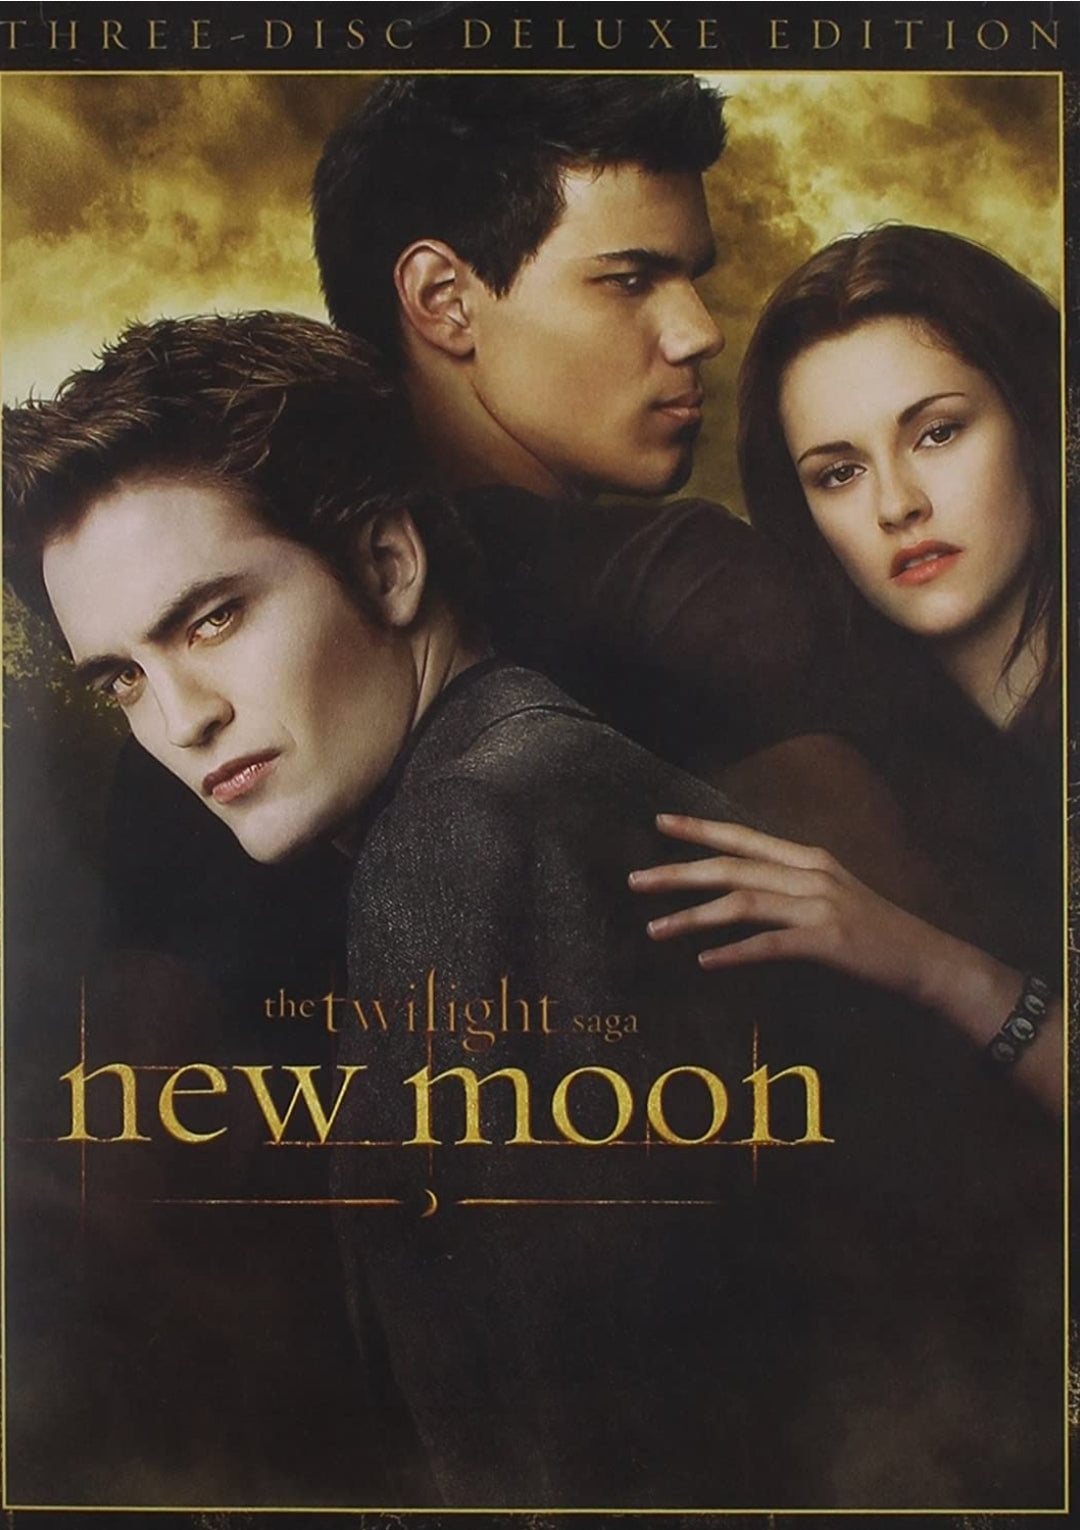 The Twilight Saga: New Moon 3-disc Deluxe Edition (used)